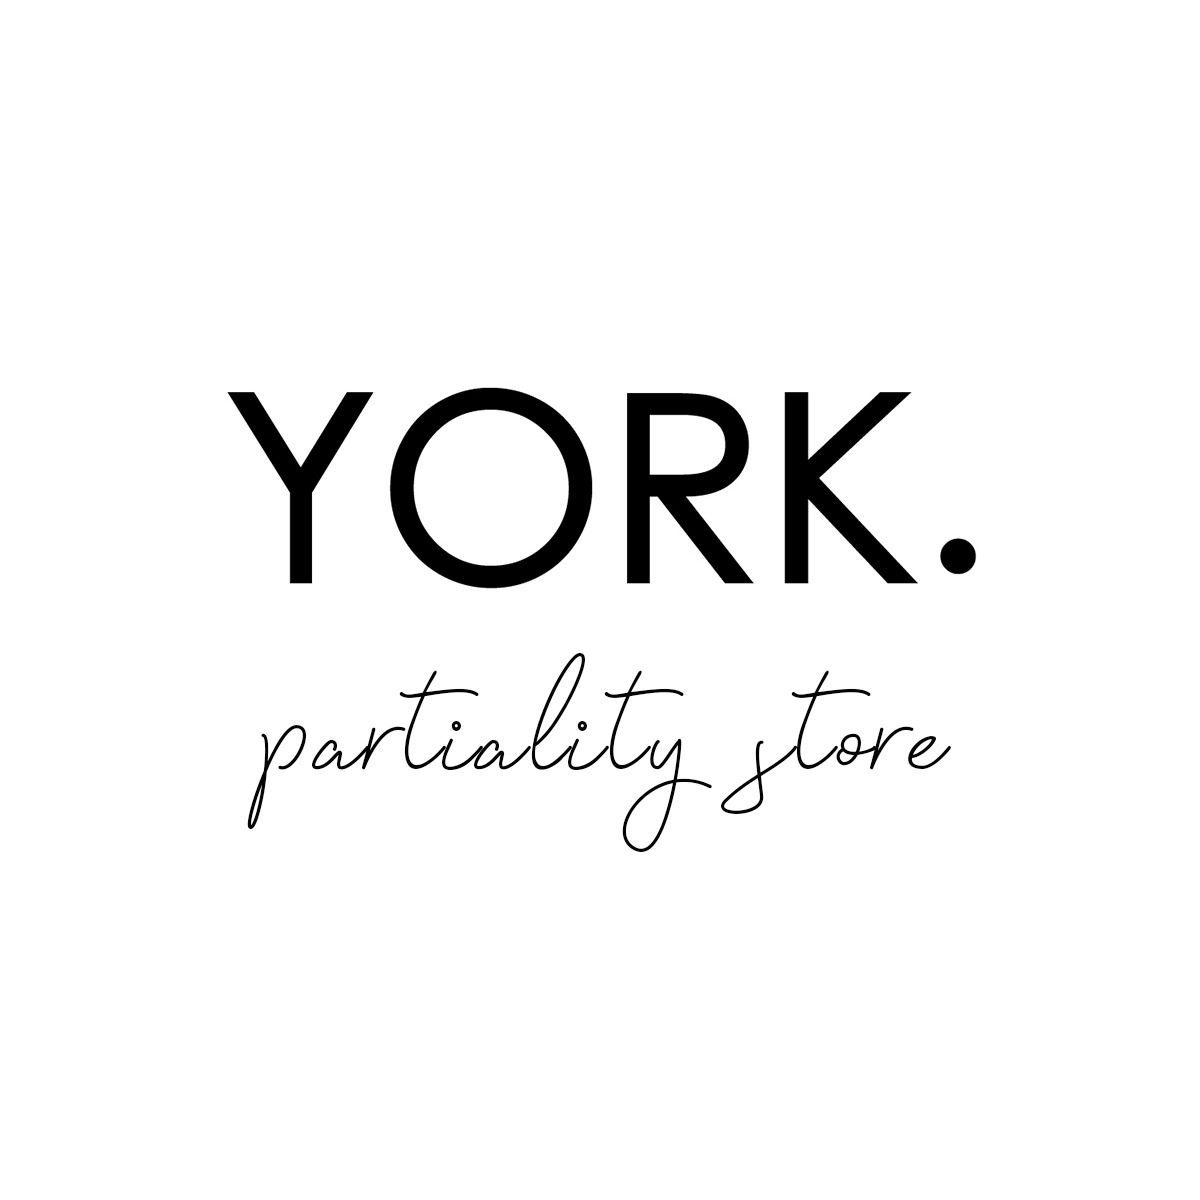 partiality store by YORK.